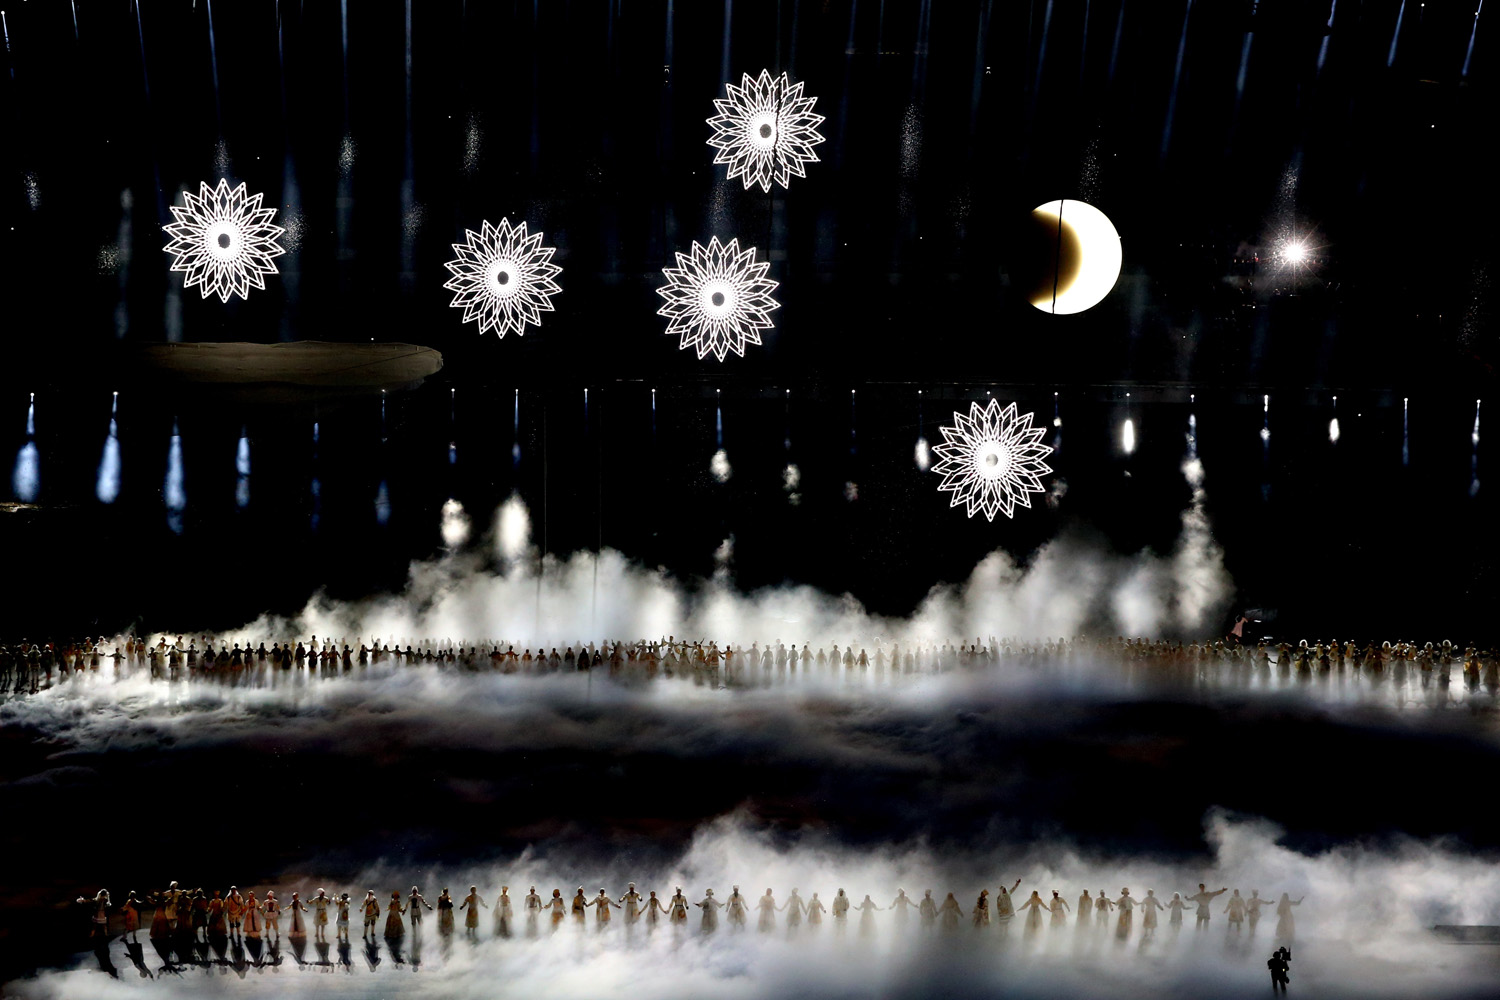 Feb. 7, 2014. Snowflakes hover above performers of Voices of Russia during the Opening Ceremony of the Sochi 2014 Winter Olympics at Fisht Olympic Stadium in Sochi, Russia.